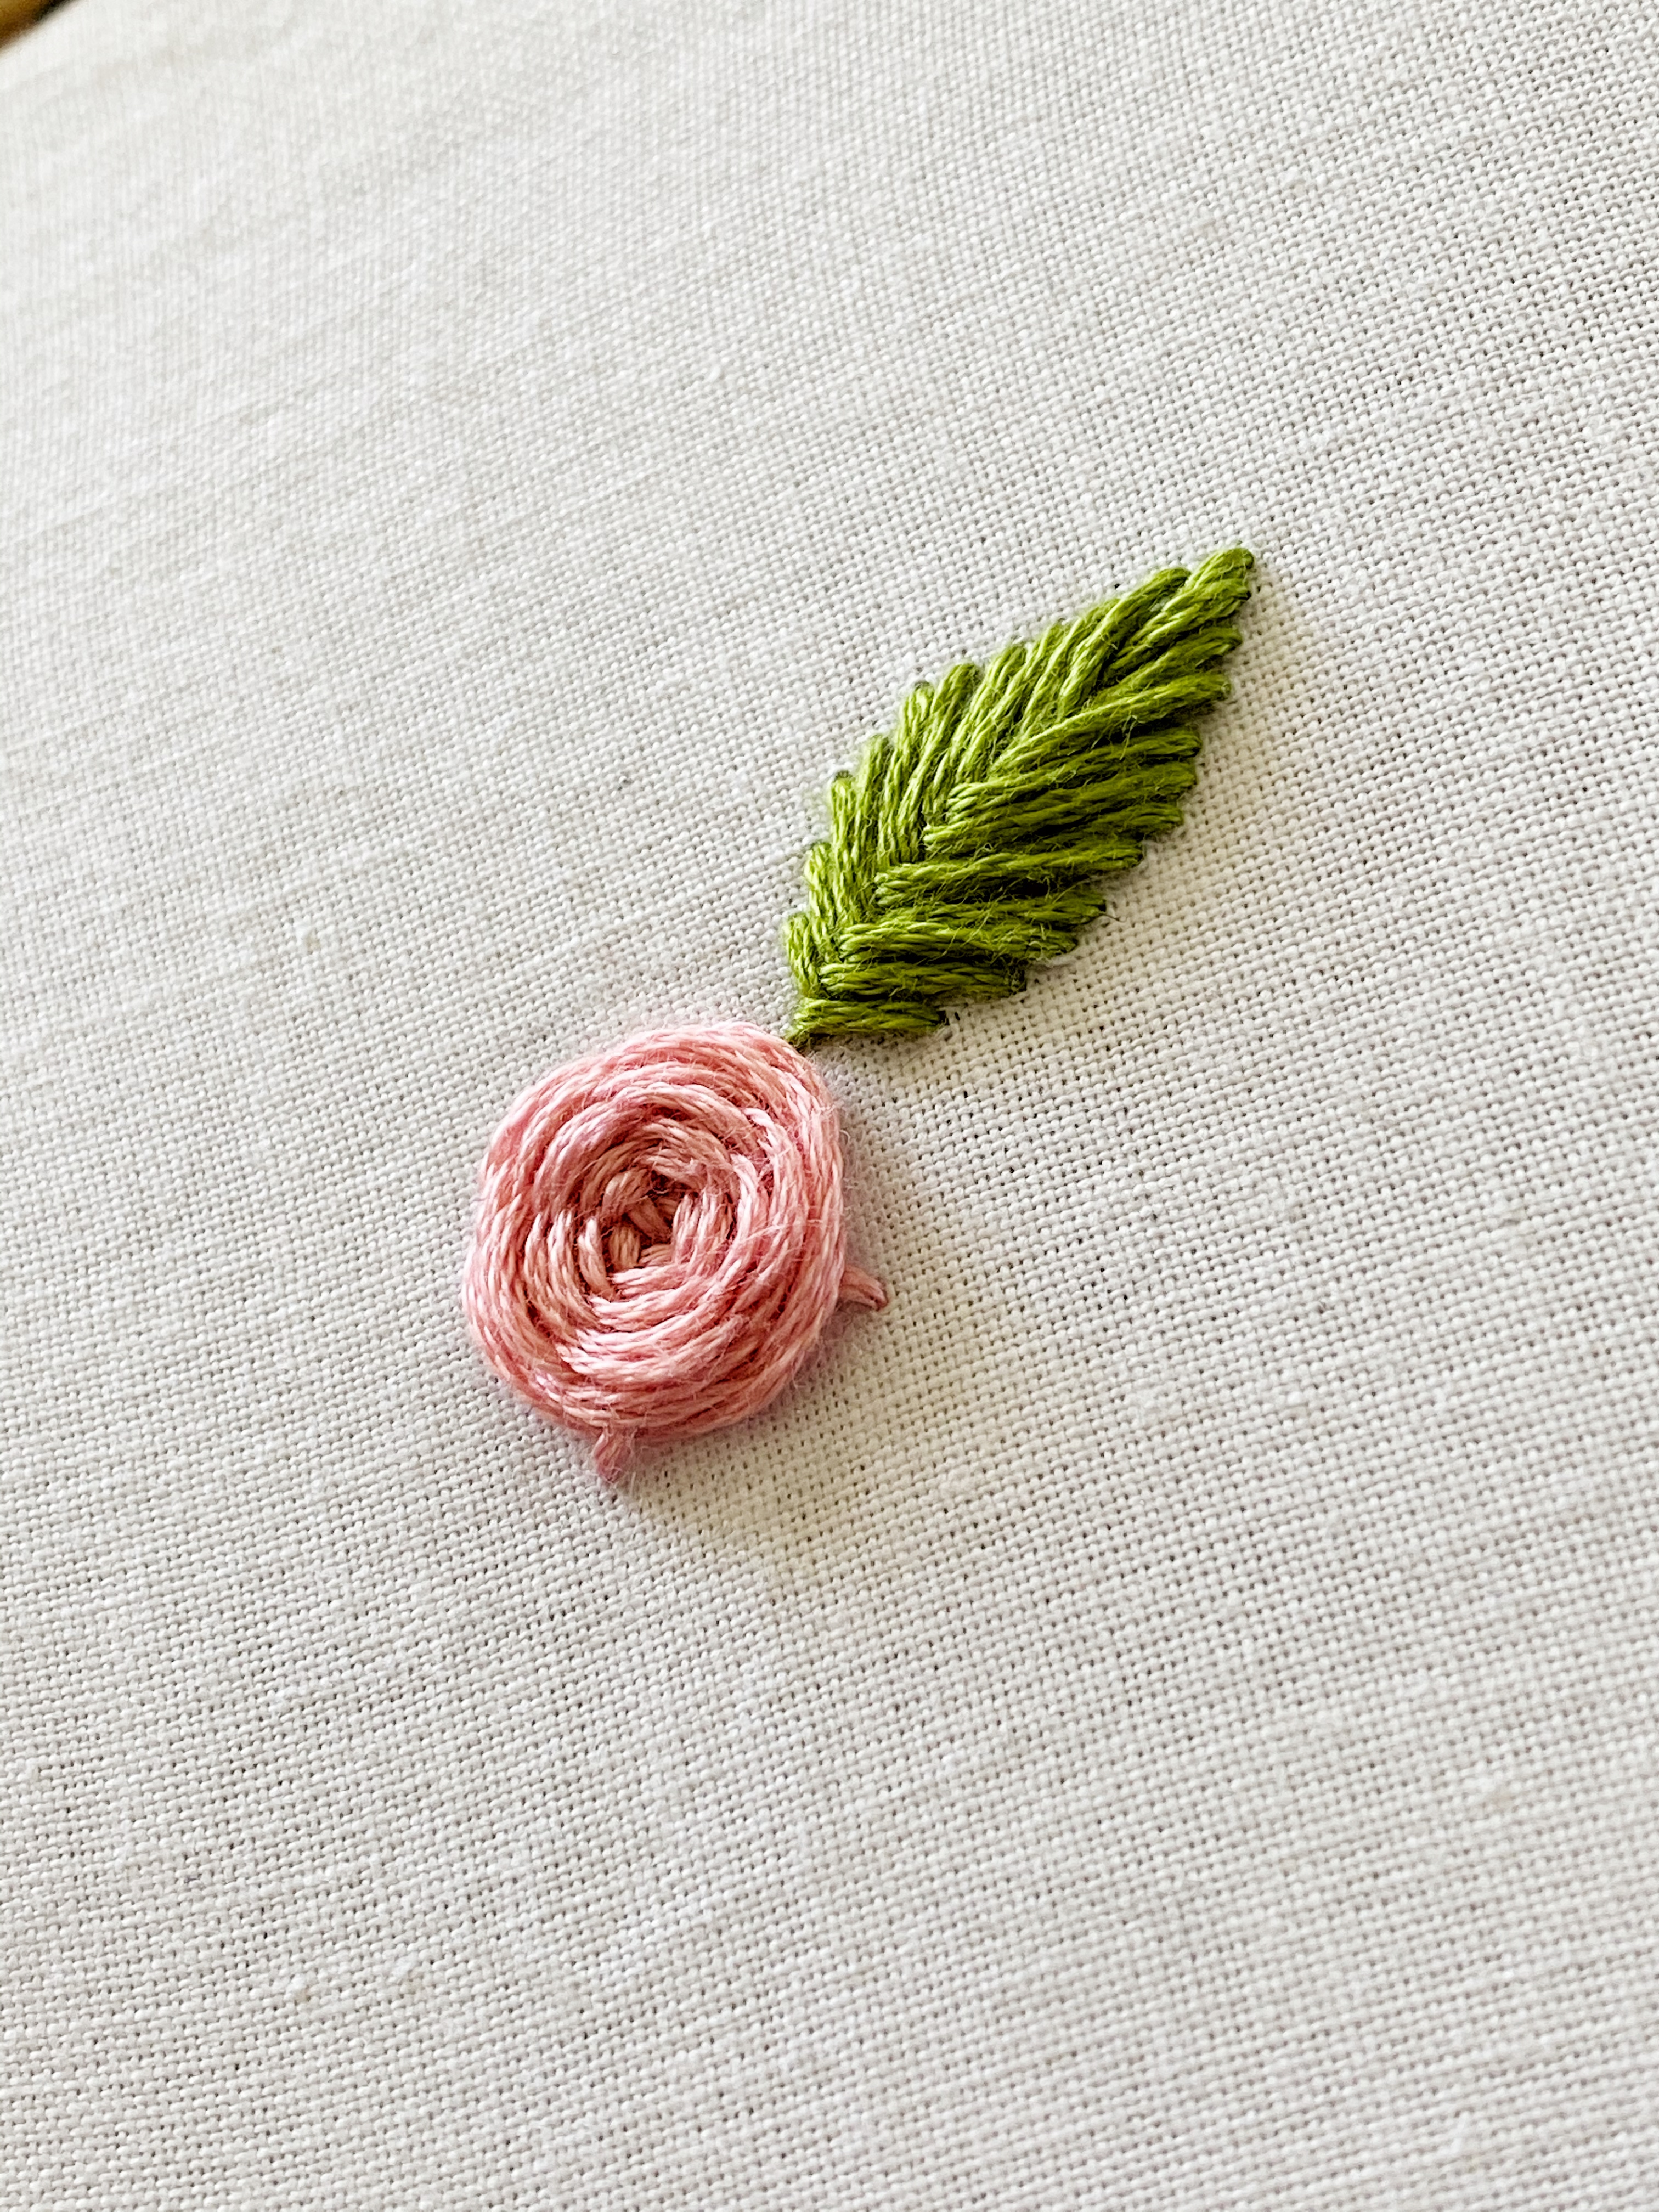 How to make a Hand Embroidery Rose, Beginner Friendly - Missy Kate